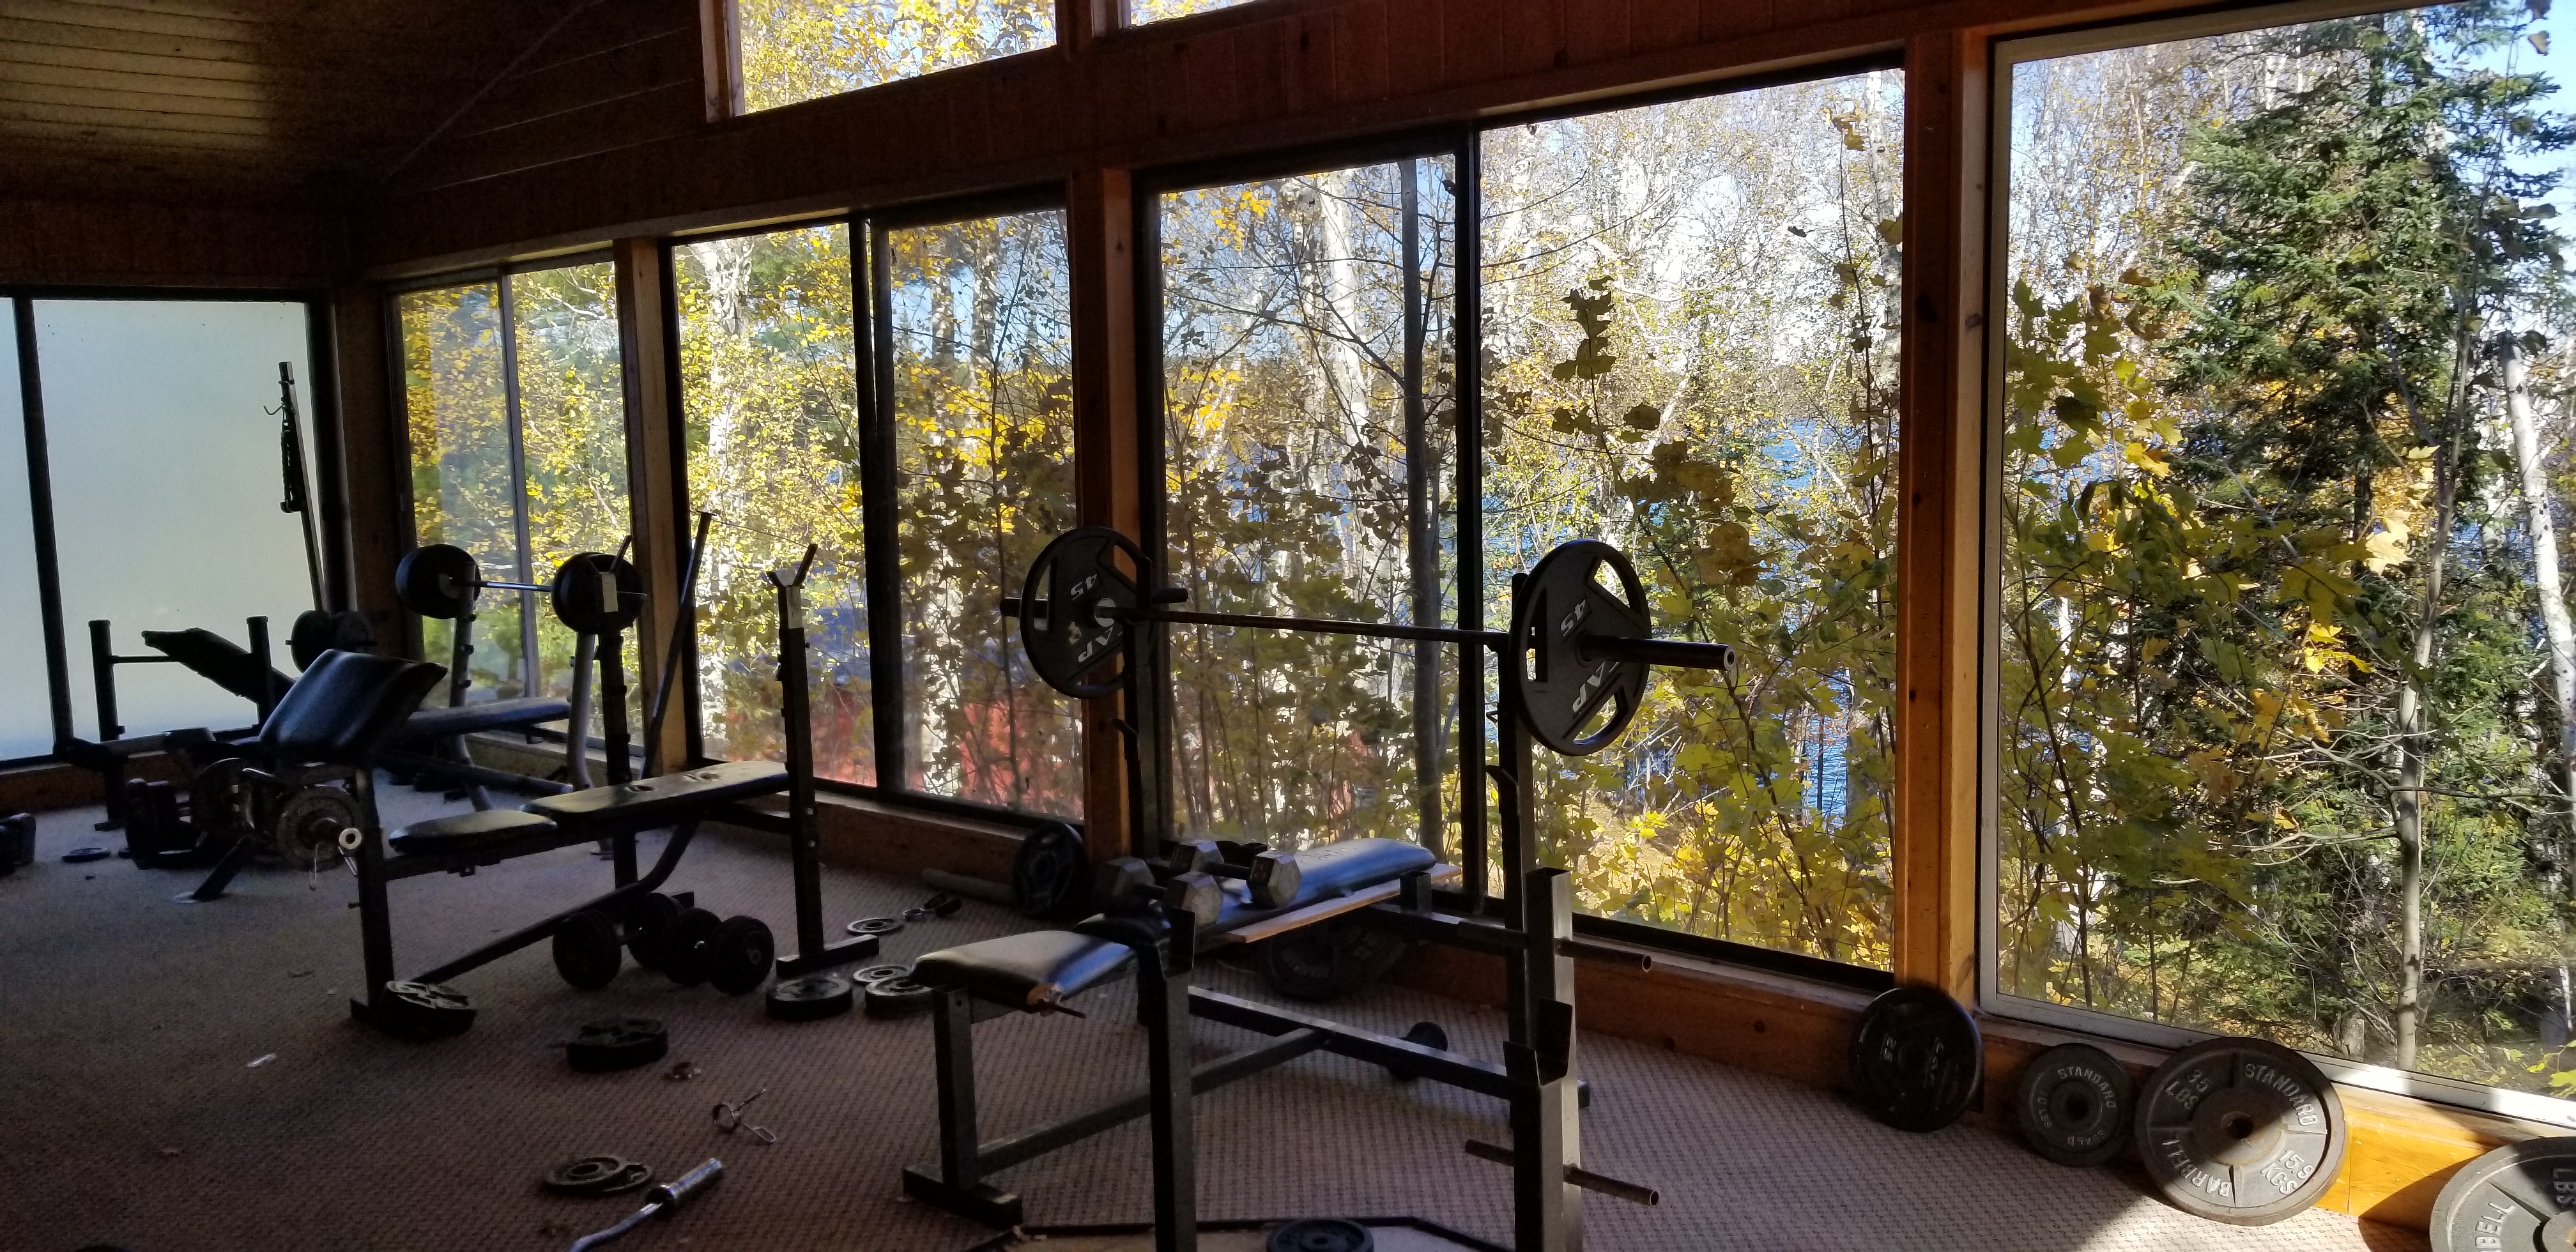 Fitness Room with a view